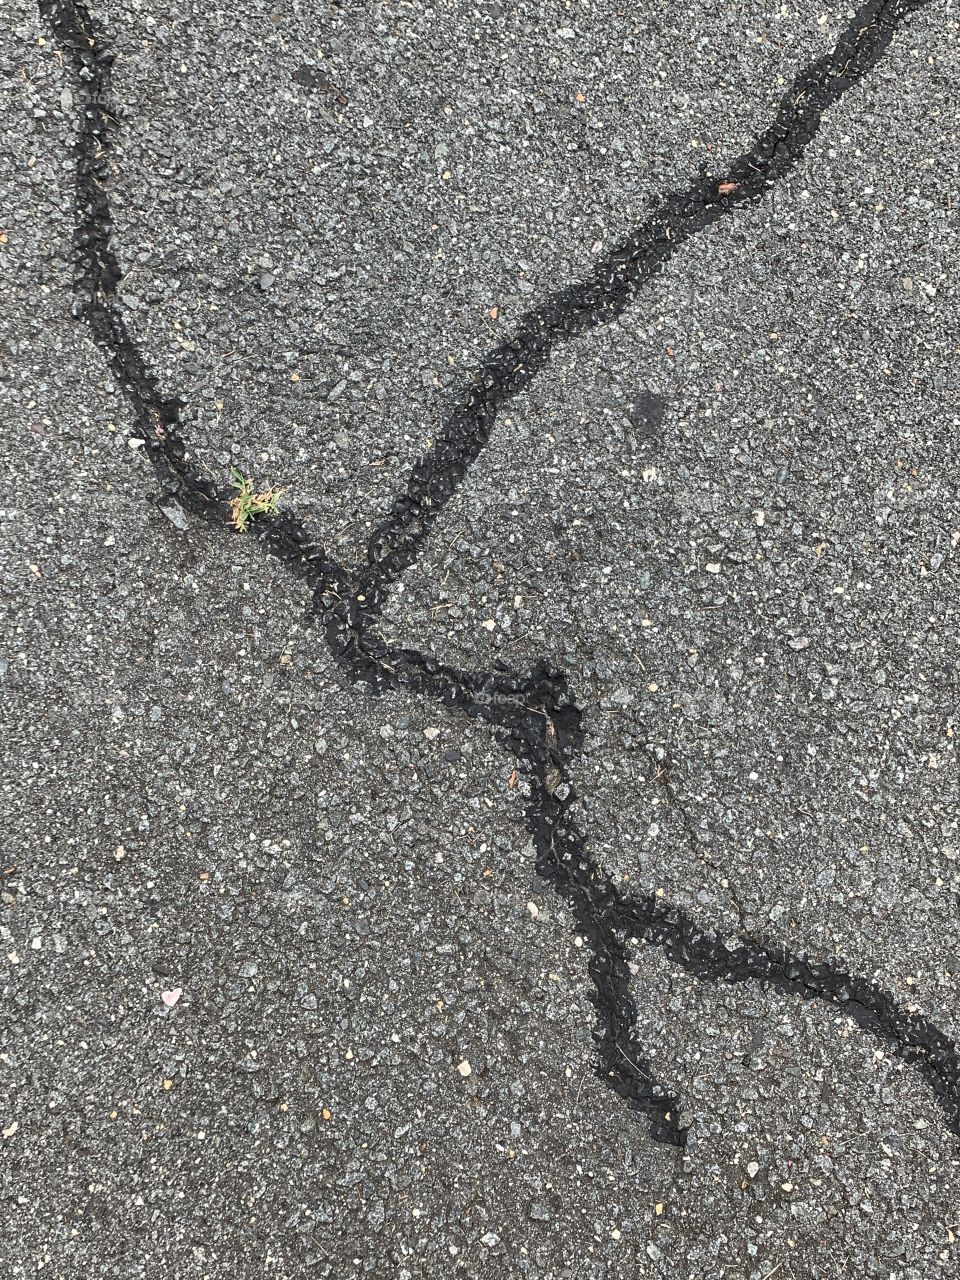 Asphalt texture with cracks. Good for backgrounds, texture maps, abstract concepts. 